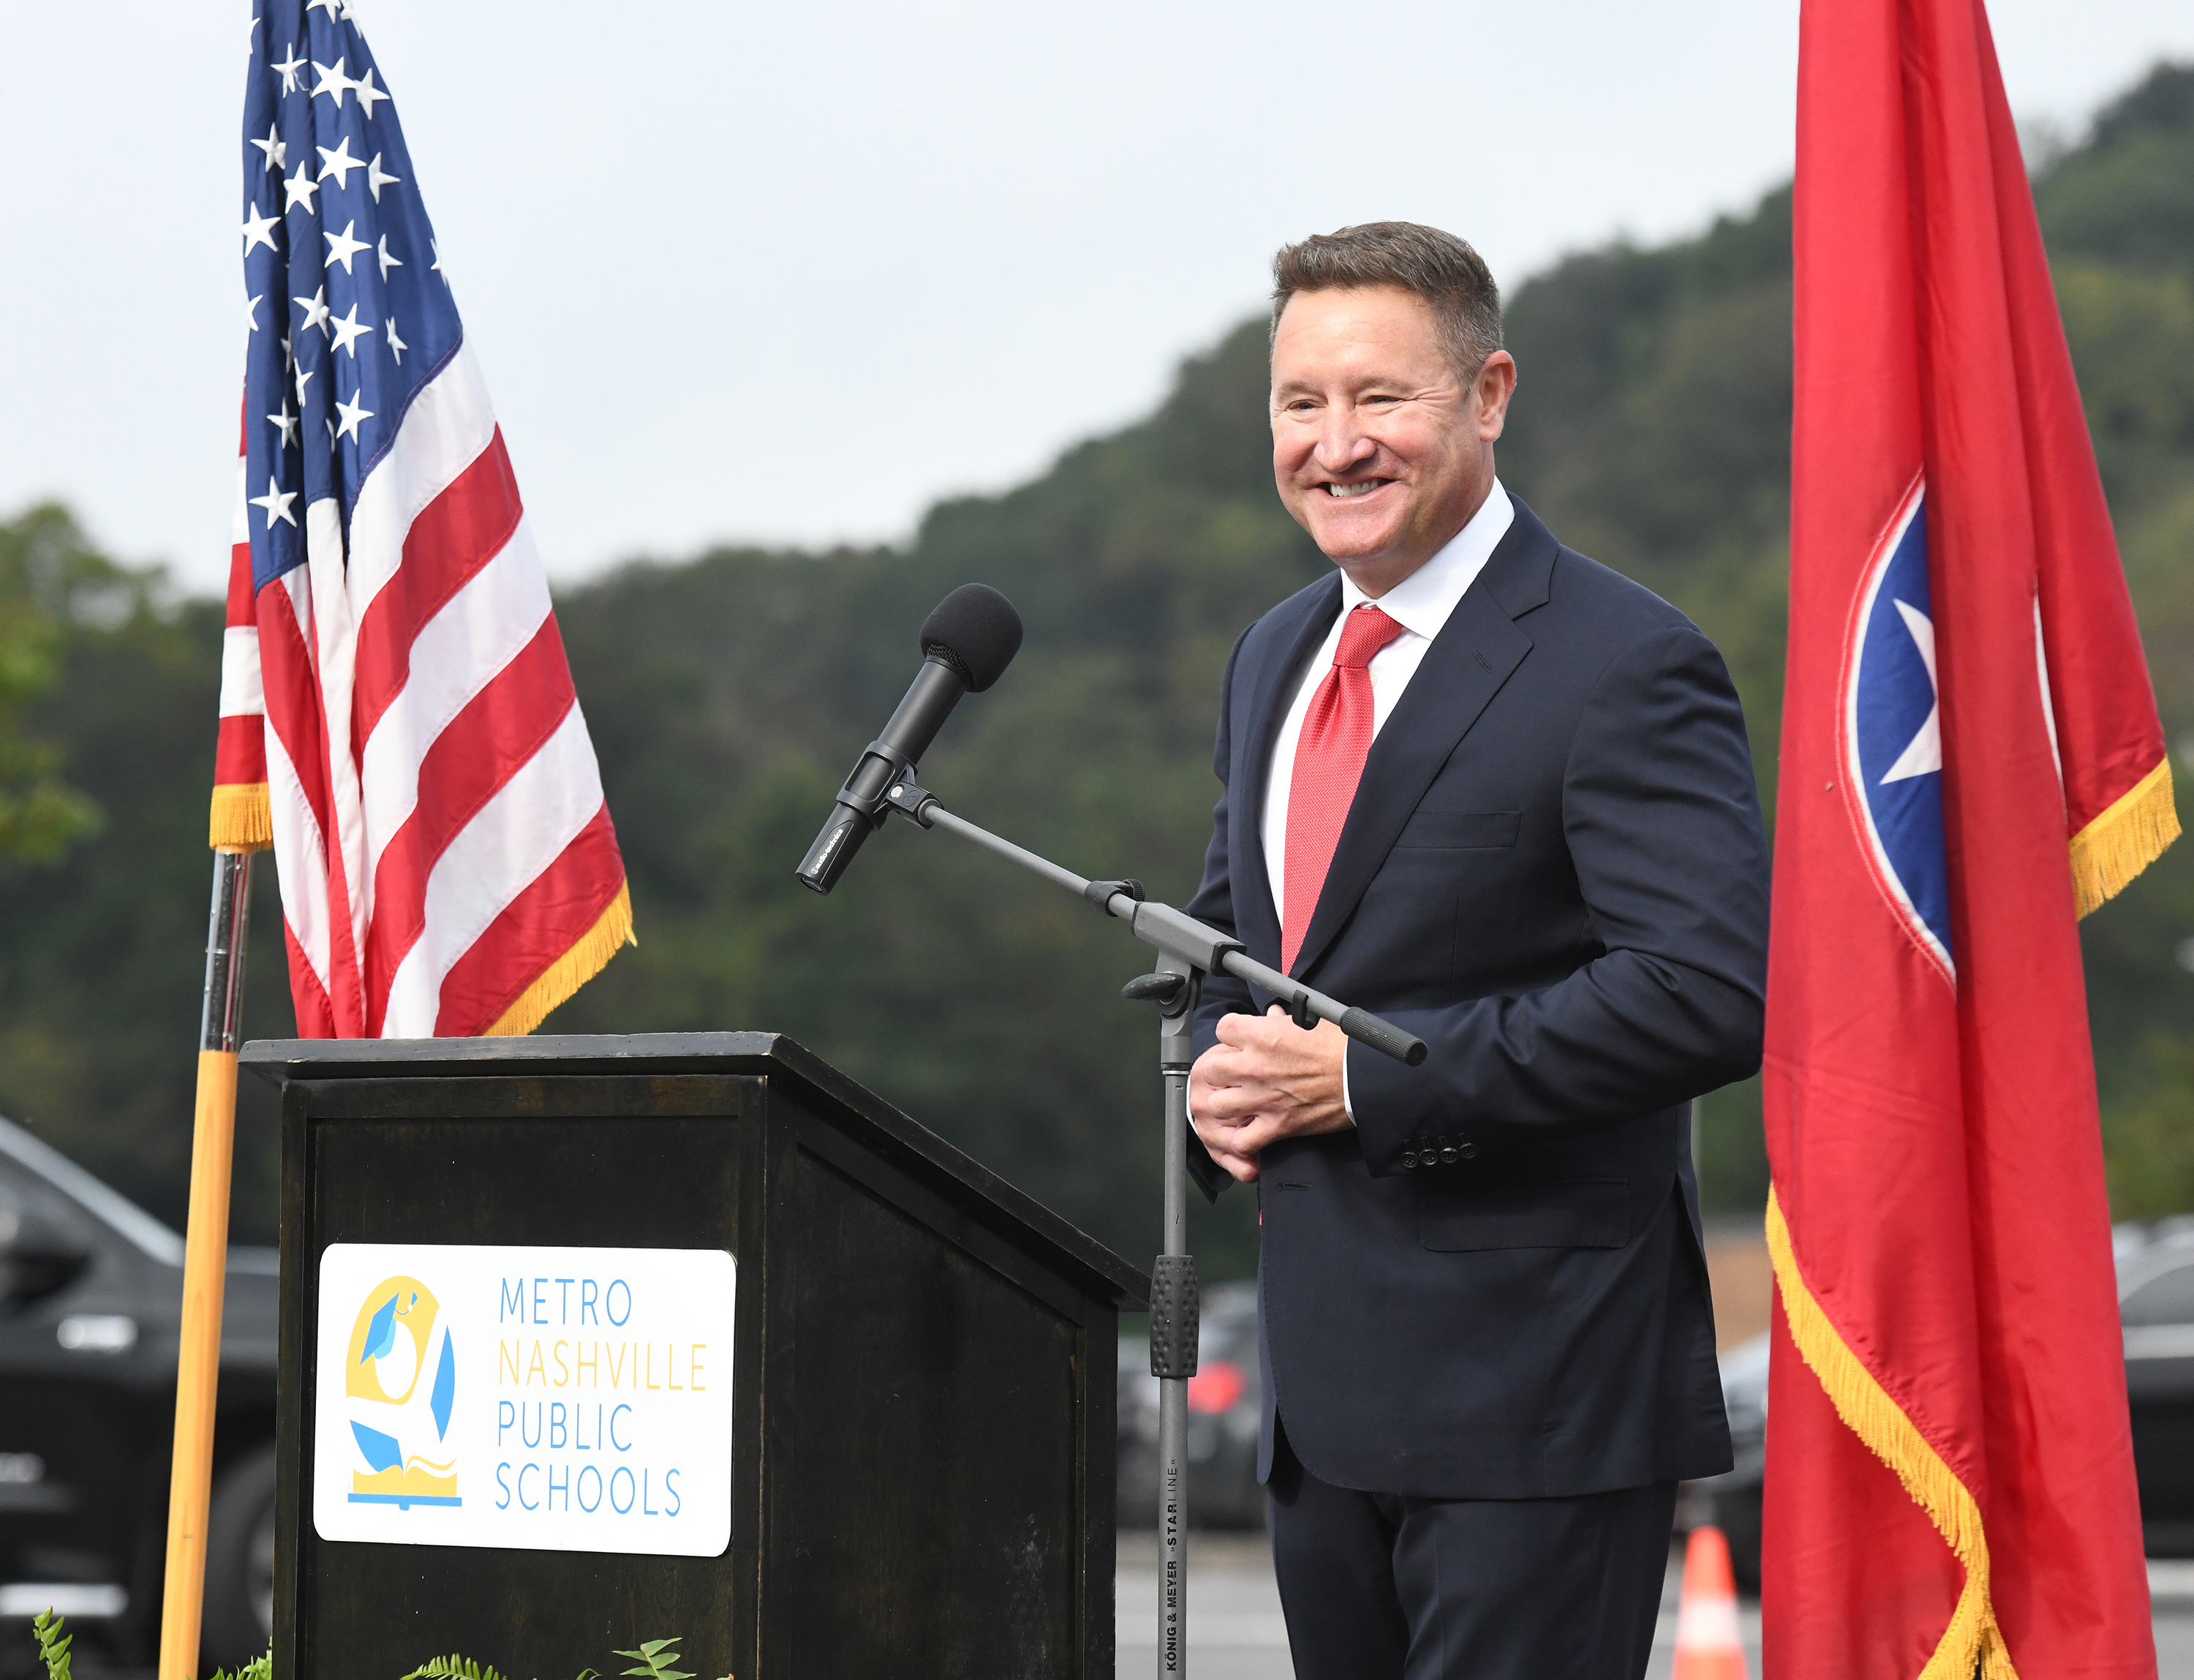 PNC Regional President for Tennessee Mike Johnson. Credit: Shelley Mays, Metro Nashville Public Schools